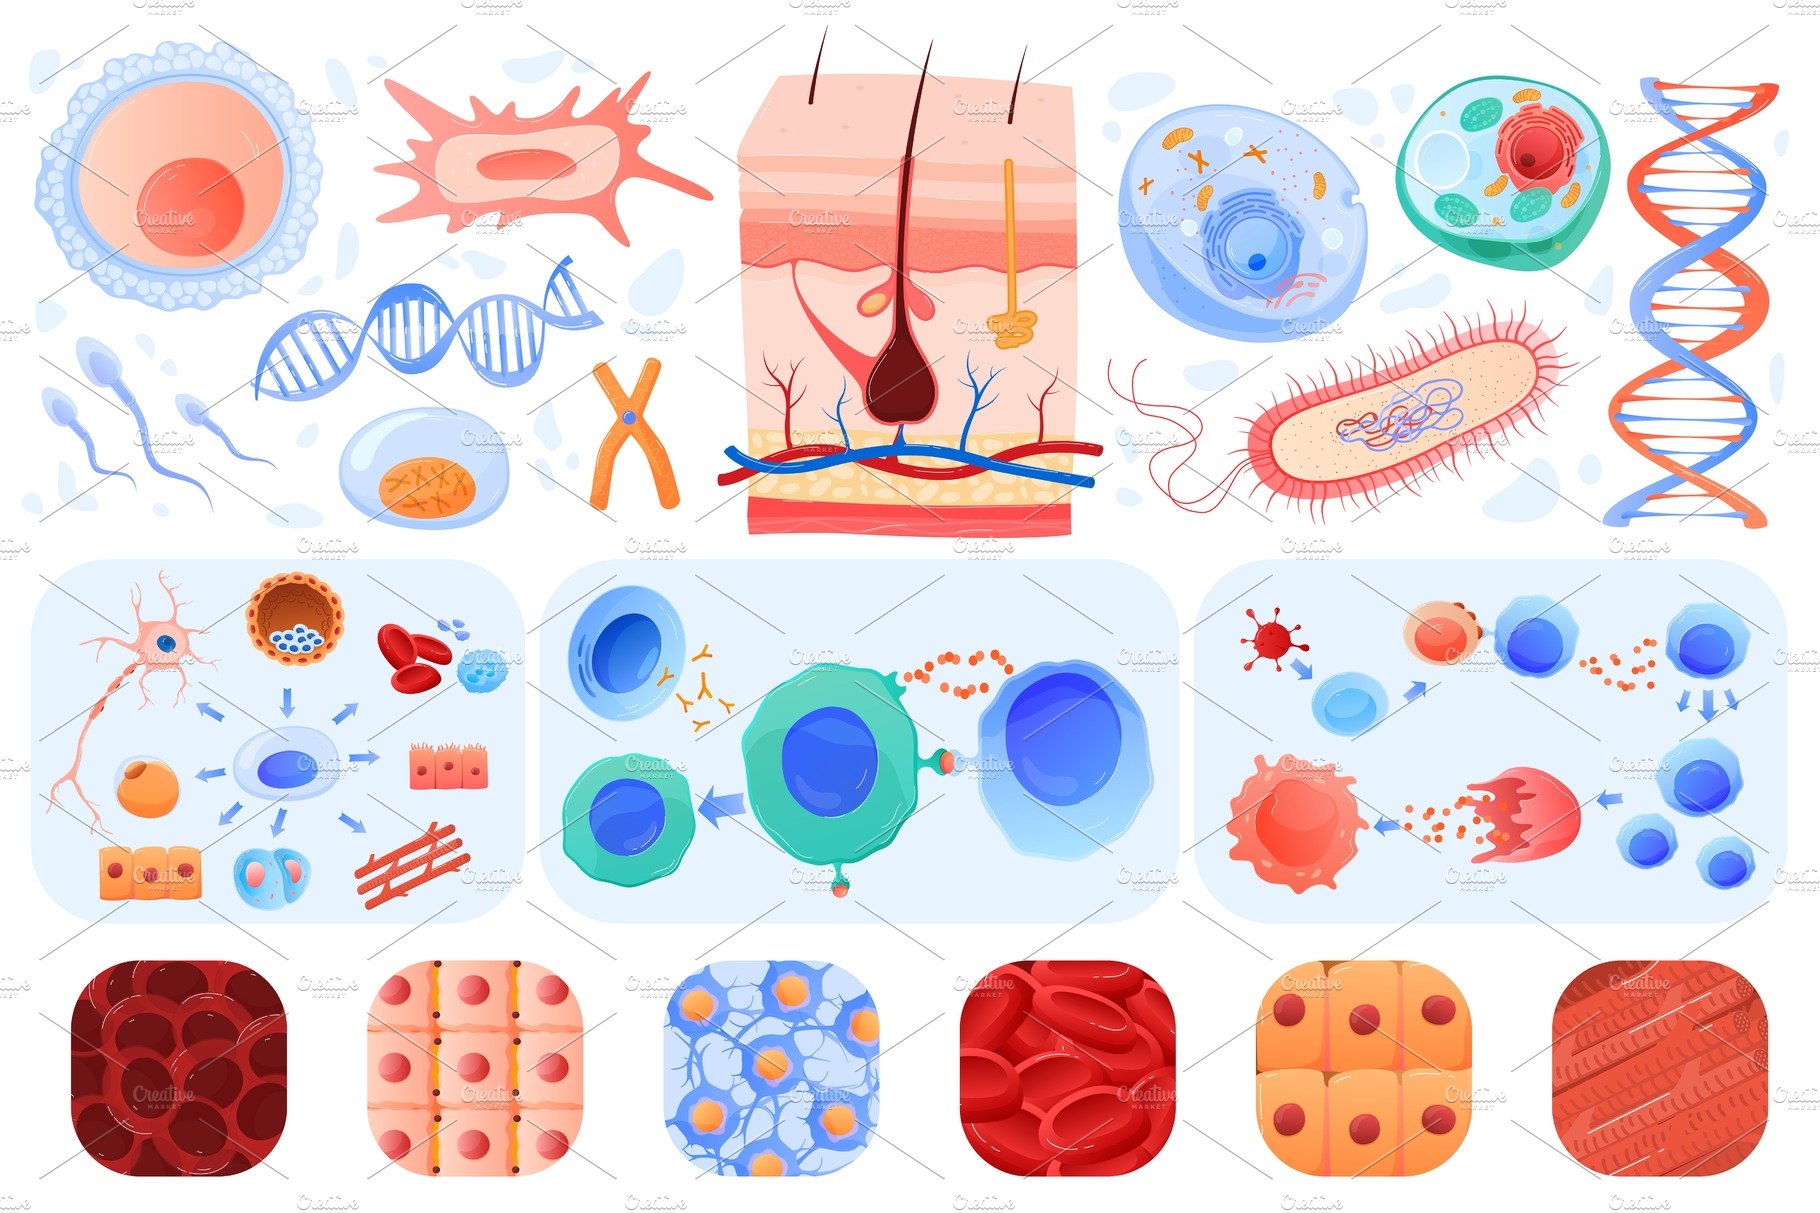 Anatomy of human cells, skin, blood cover image.